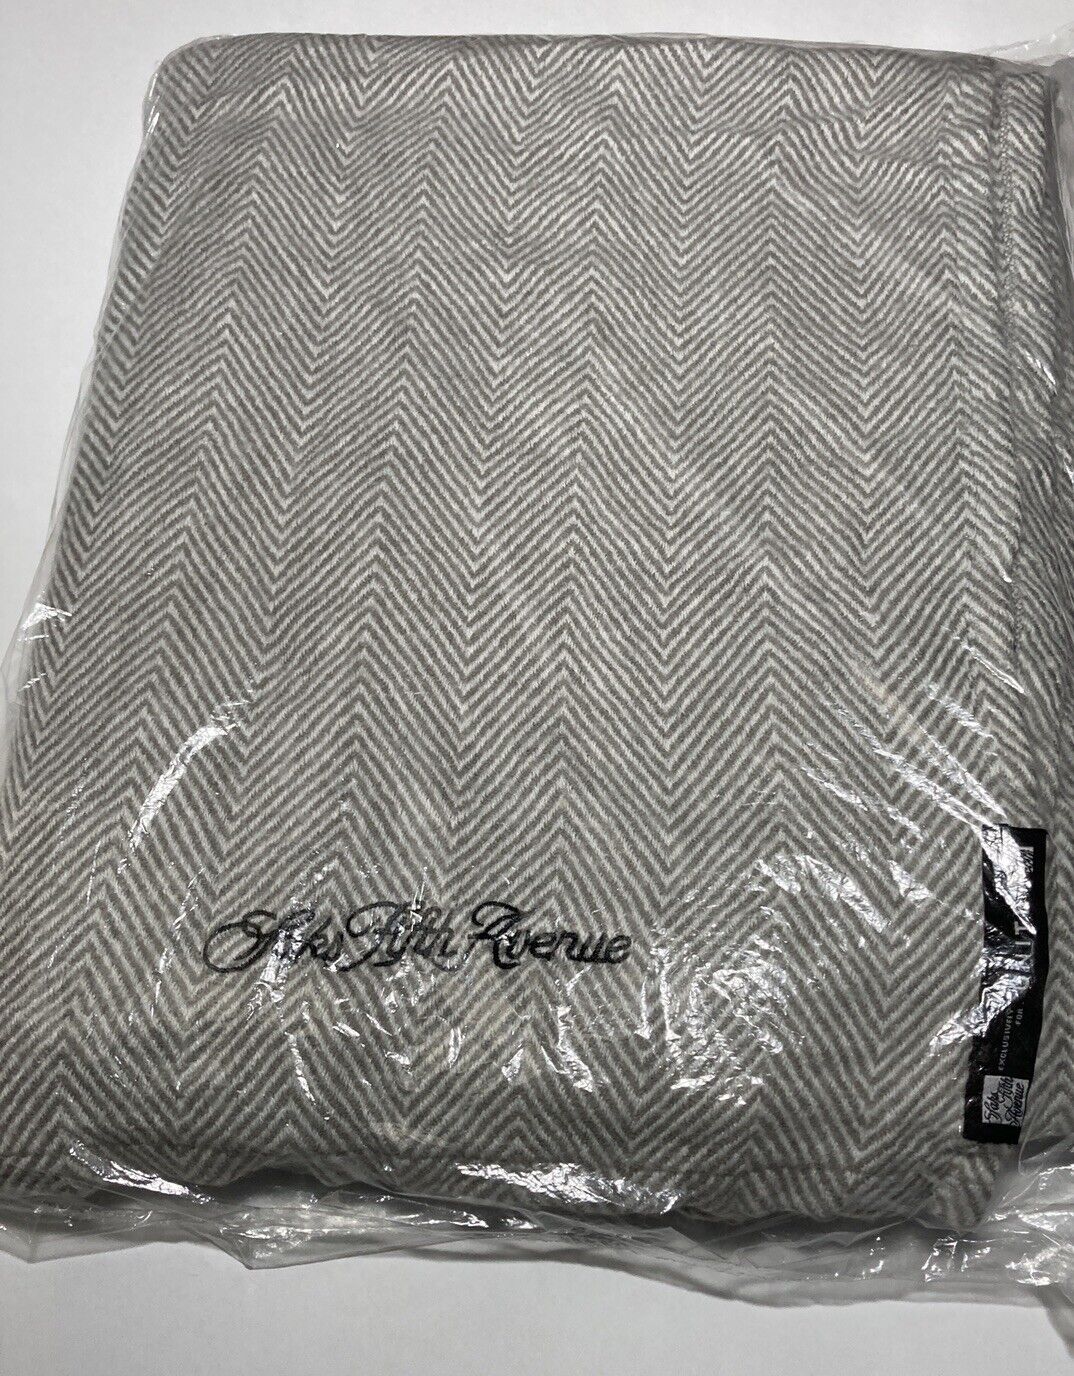 UNITED AIRLINES Polaris SAKS FIFTH AVENUE Gray Blanket ✨NEW SEALED